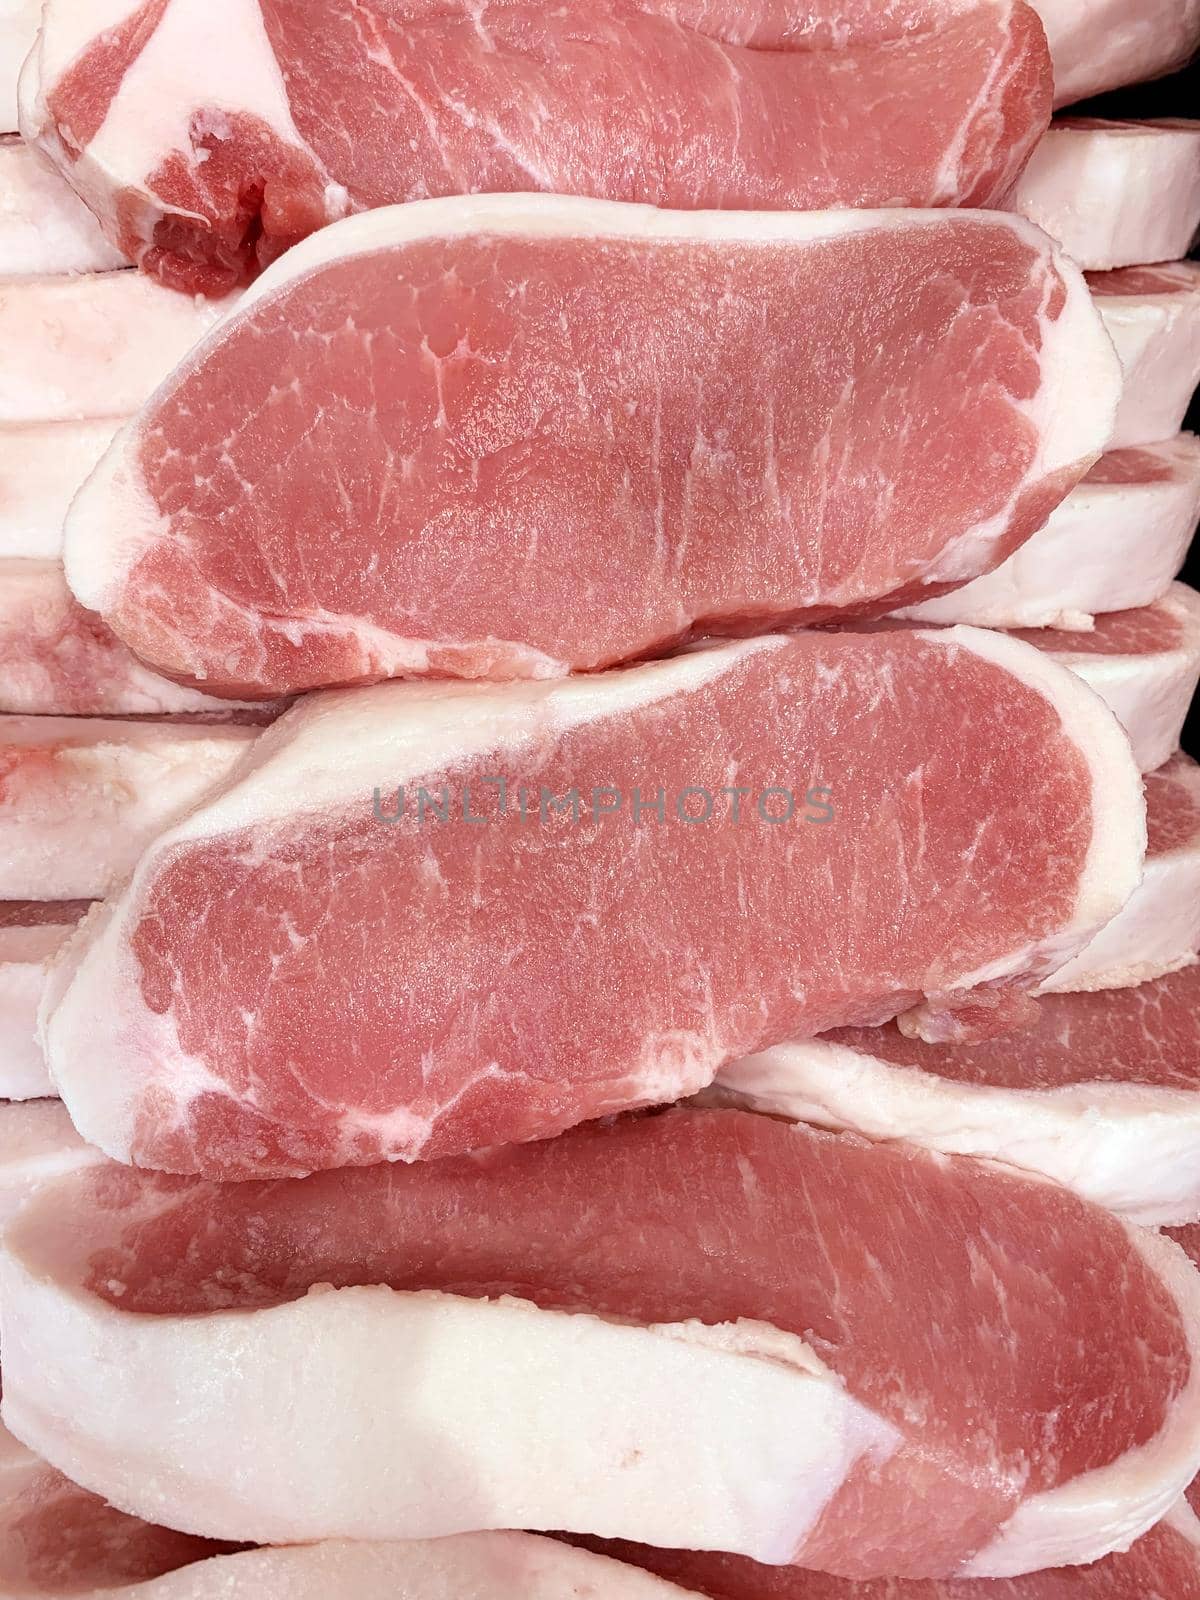 Pork raw meat slices in a butcher shop by aroas